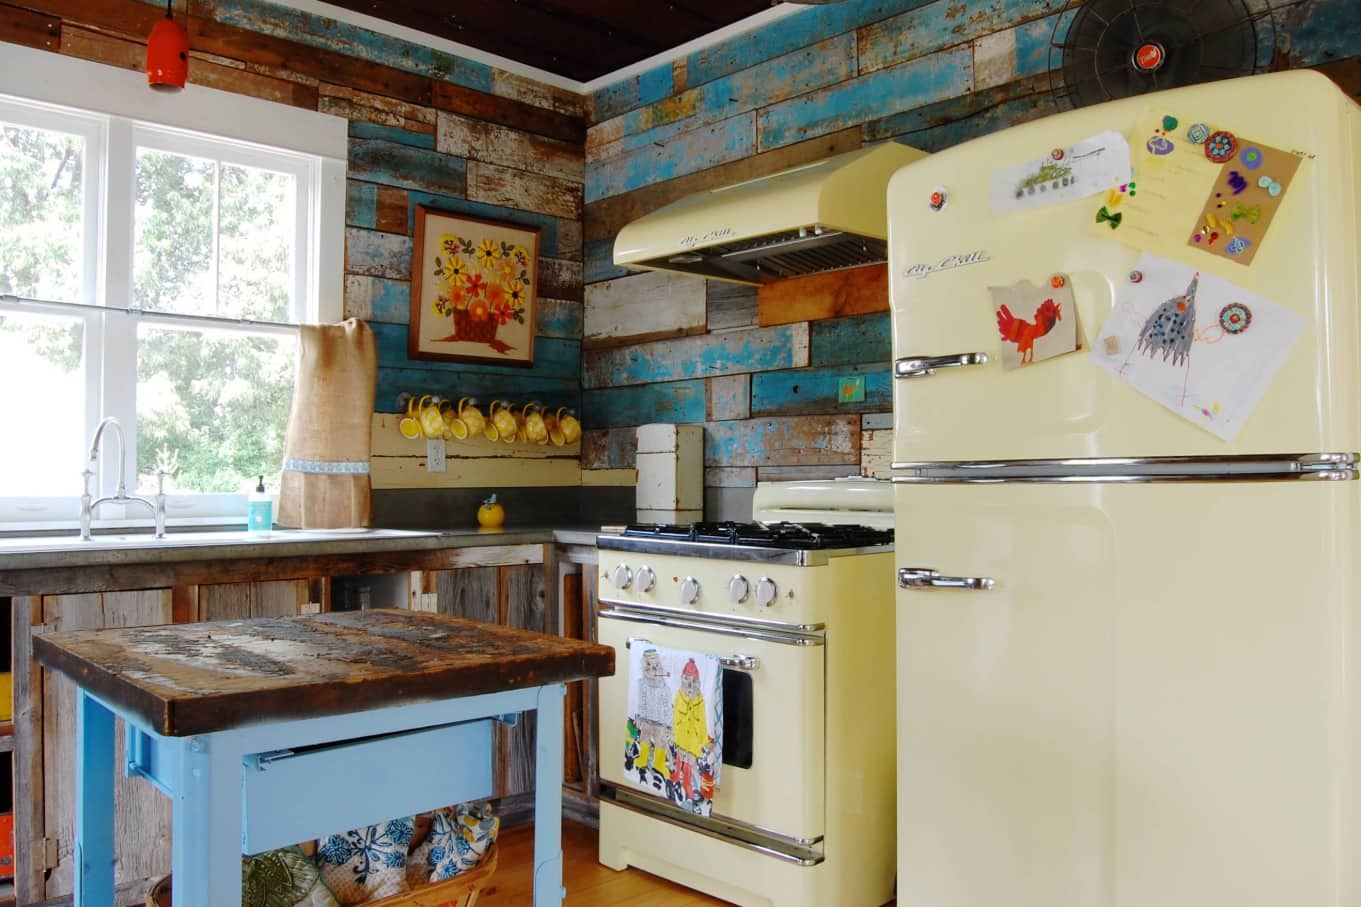 Soon to Be Timeless: 10 Current Interior Design Trends That Will Last. Retro kitchen with pathwork of painted walls